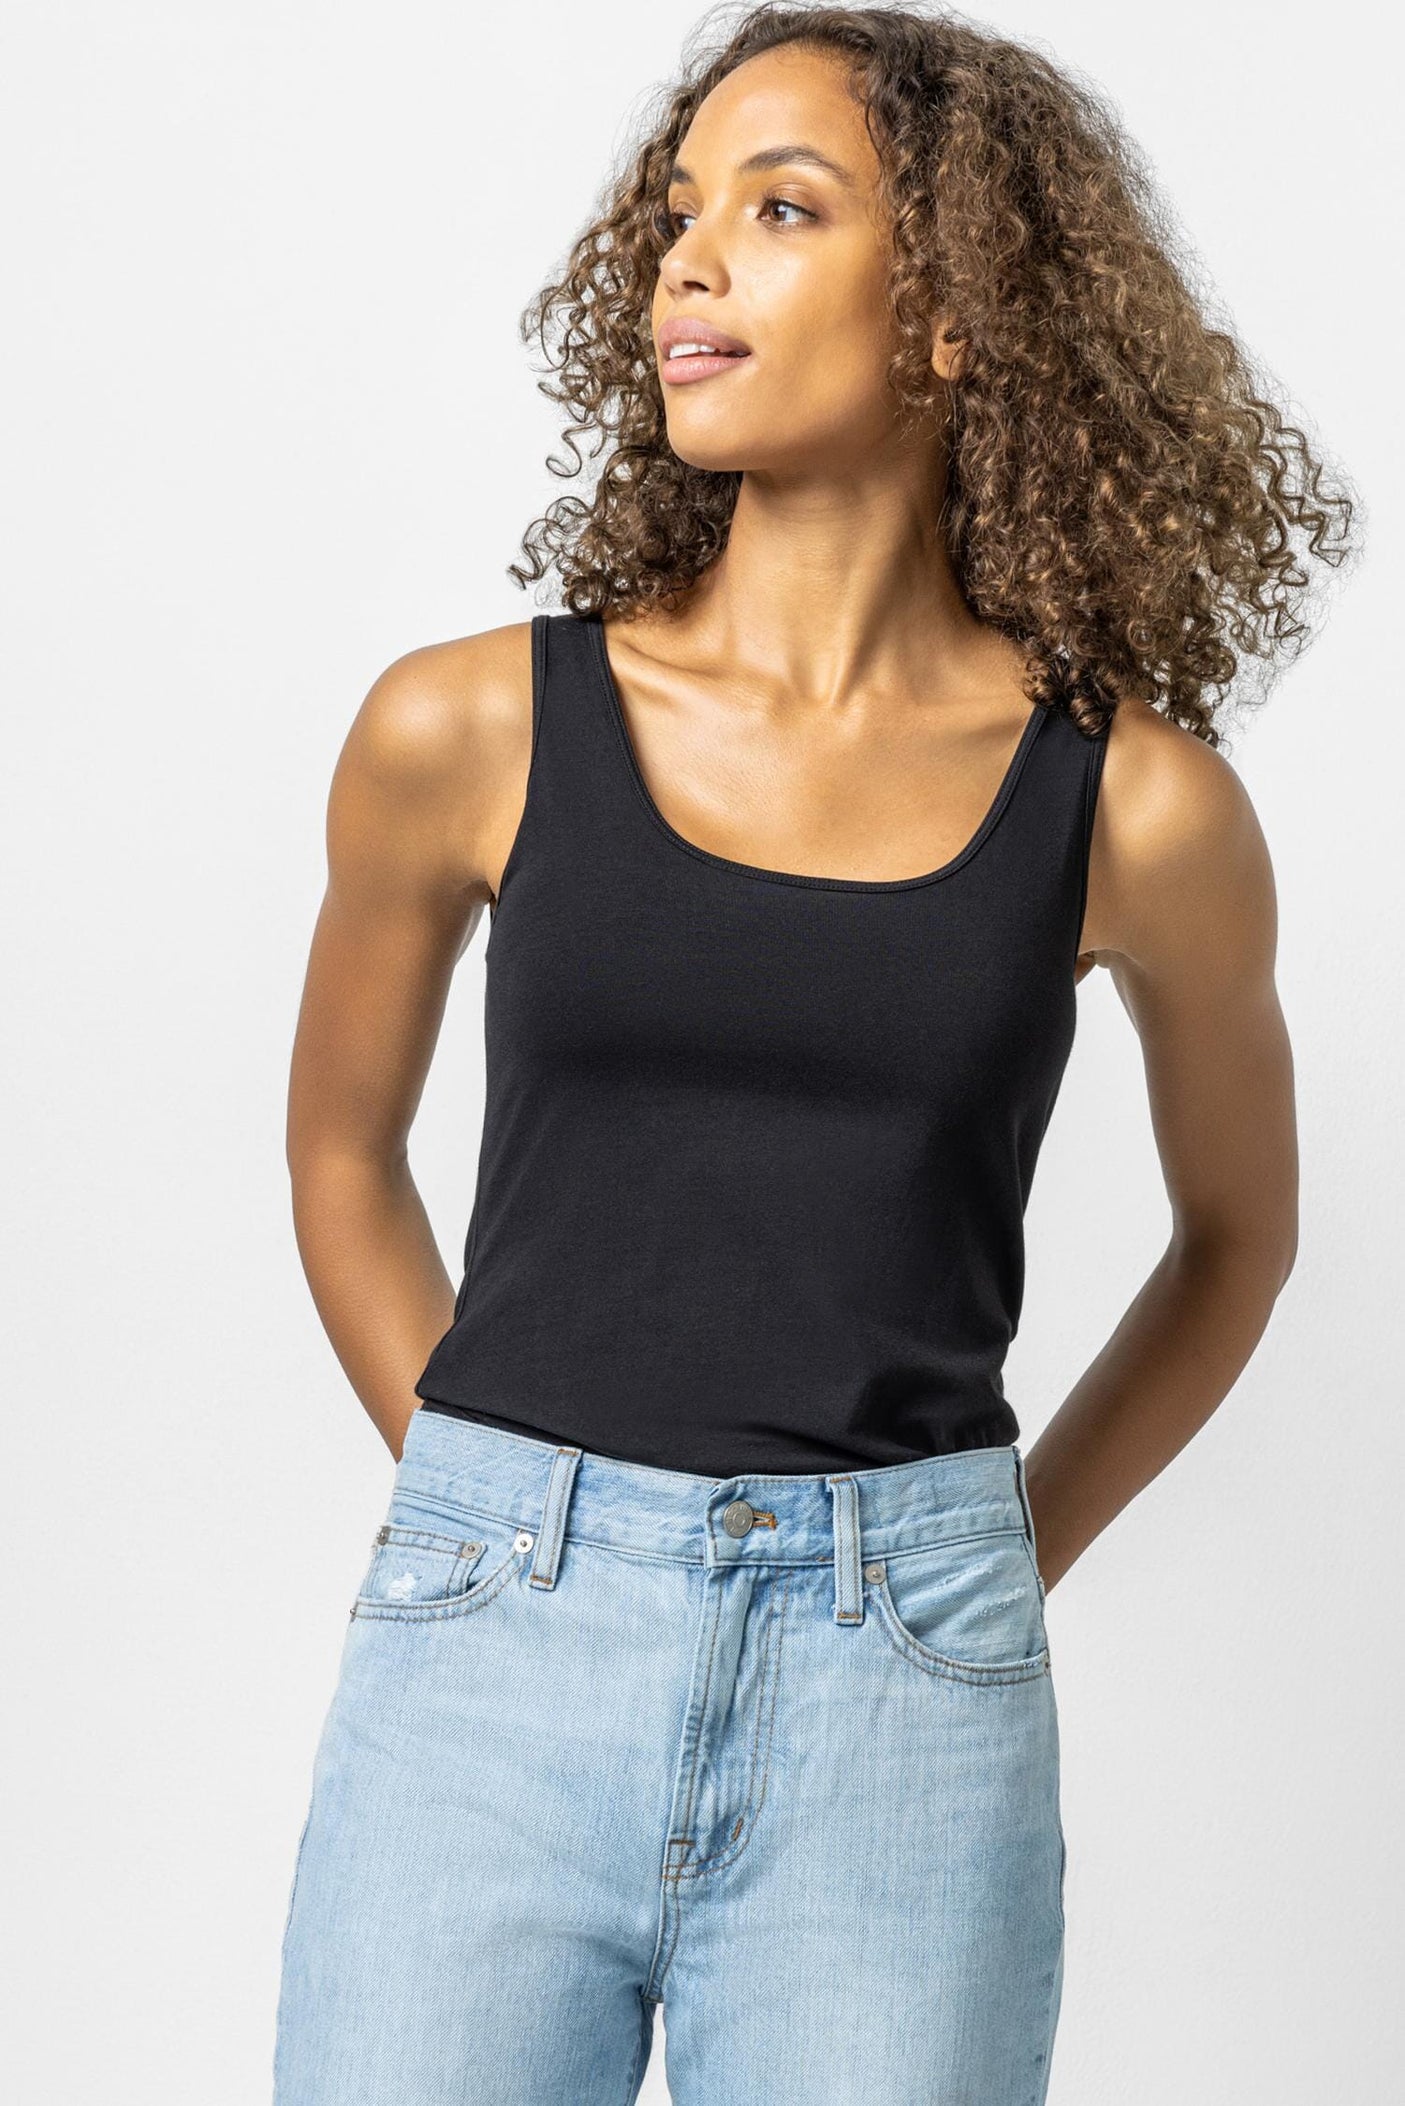 Scoop Tank | Cotton Blend Clothing Top for Women